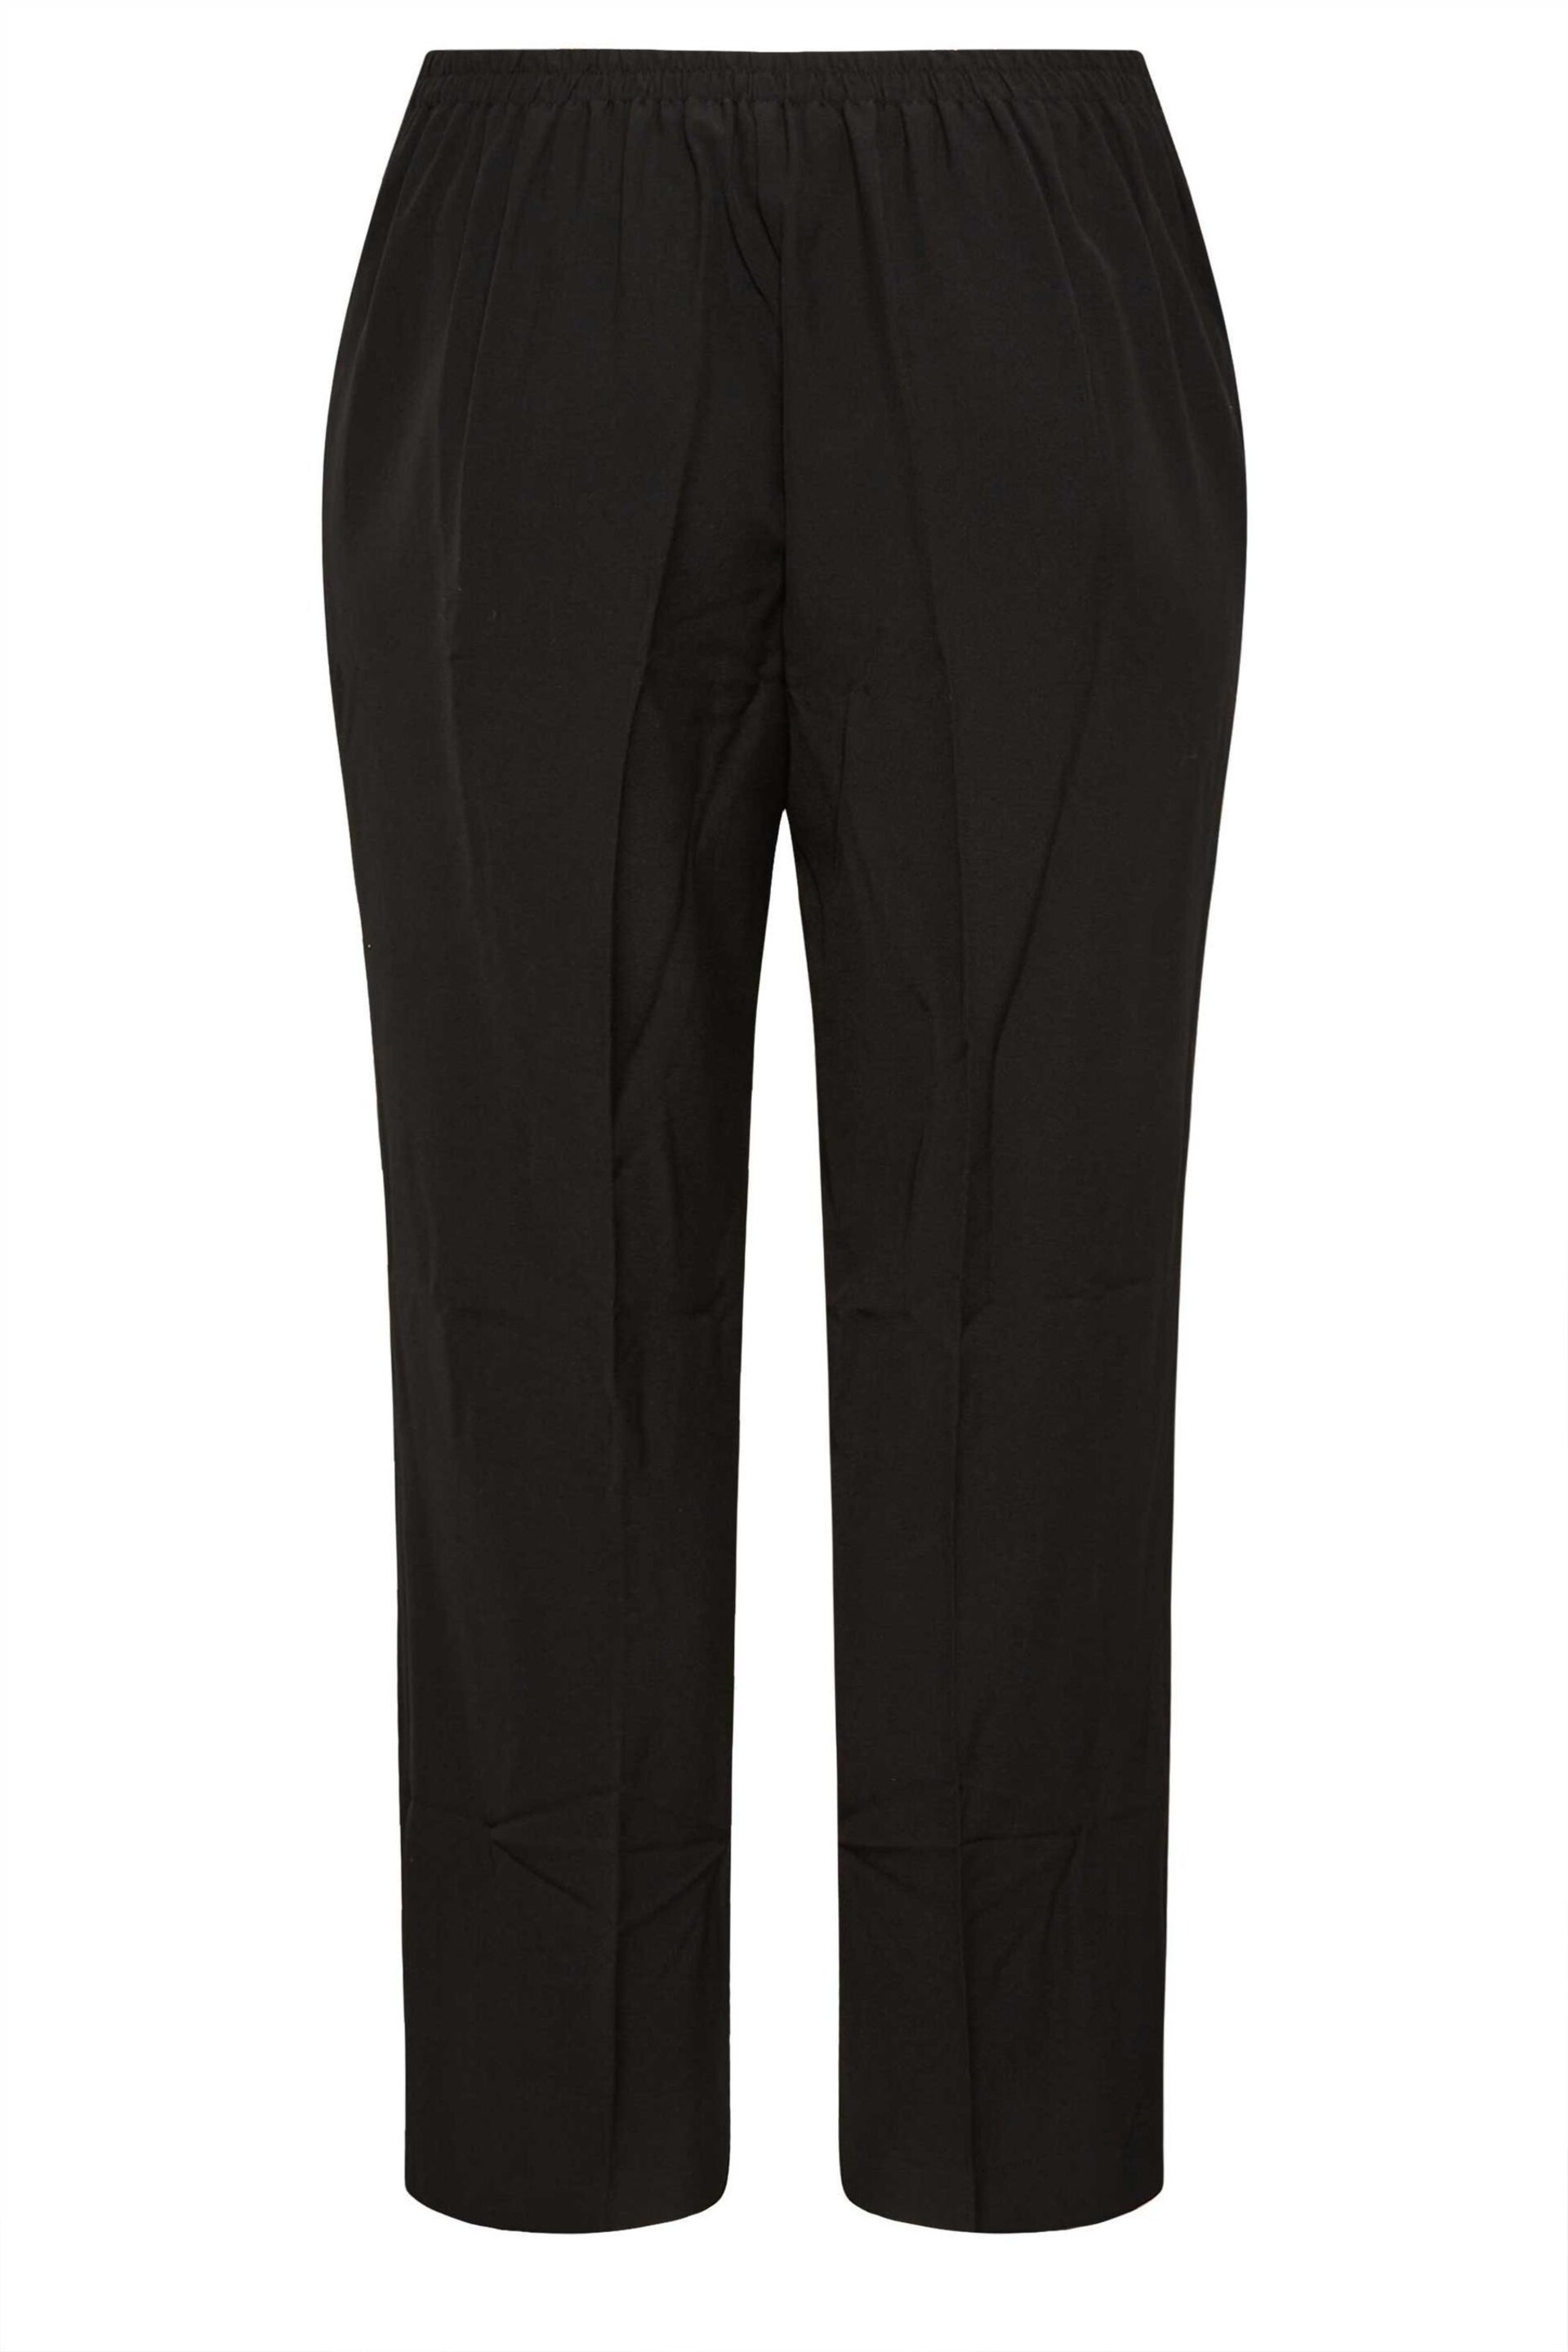 Yours Curve Black Elasticated Stretch Straight Leg Trousers - Image 6 of 6